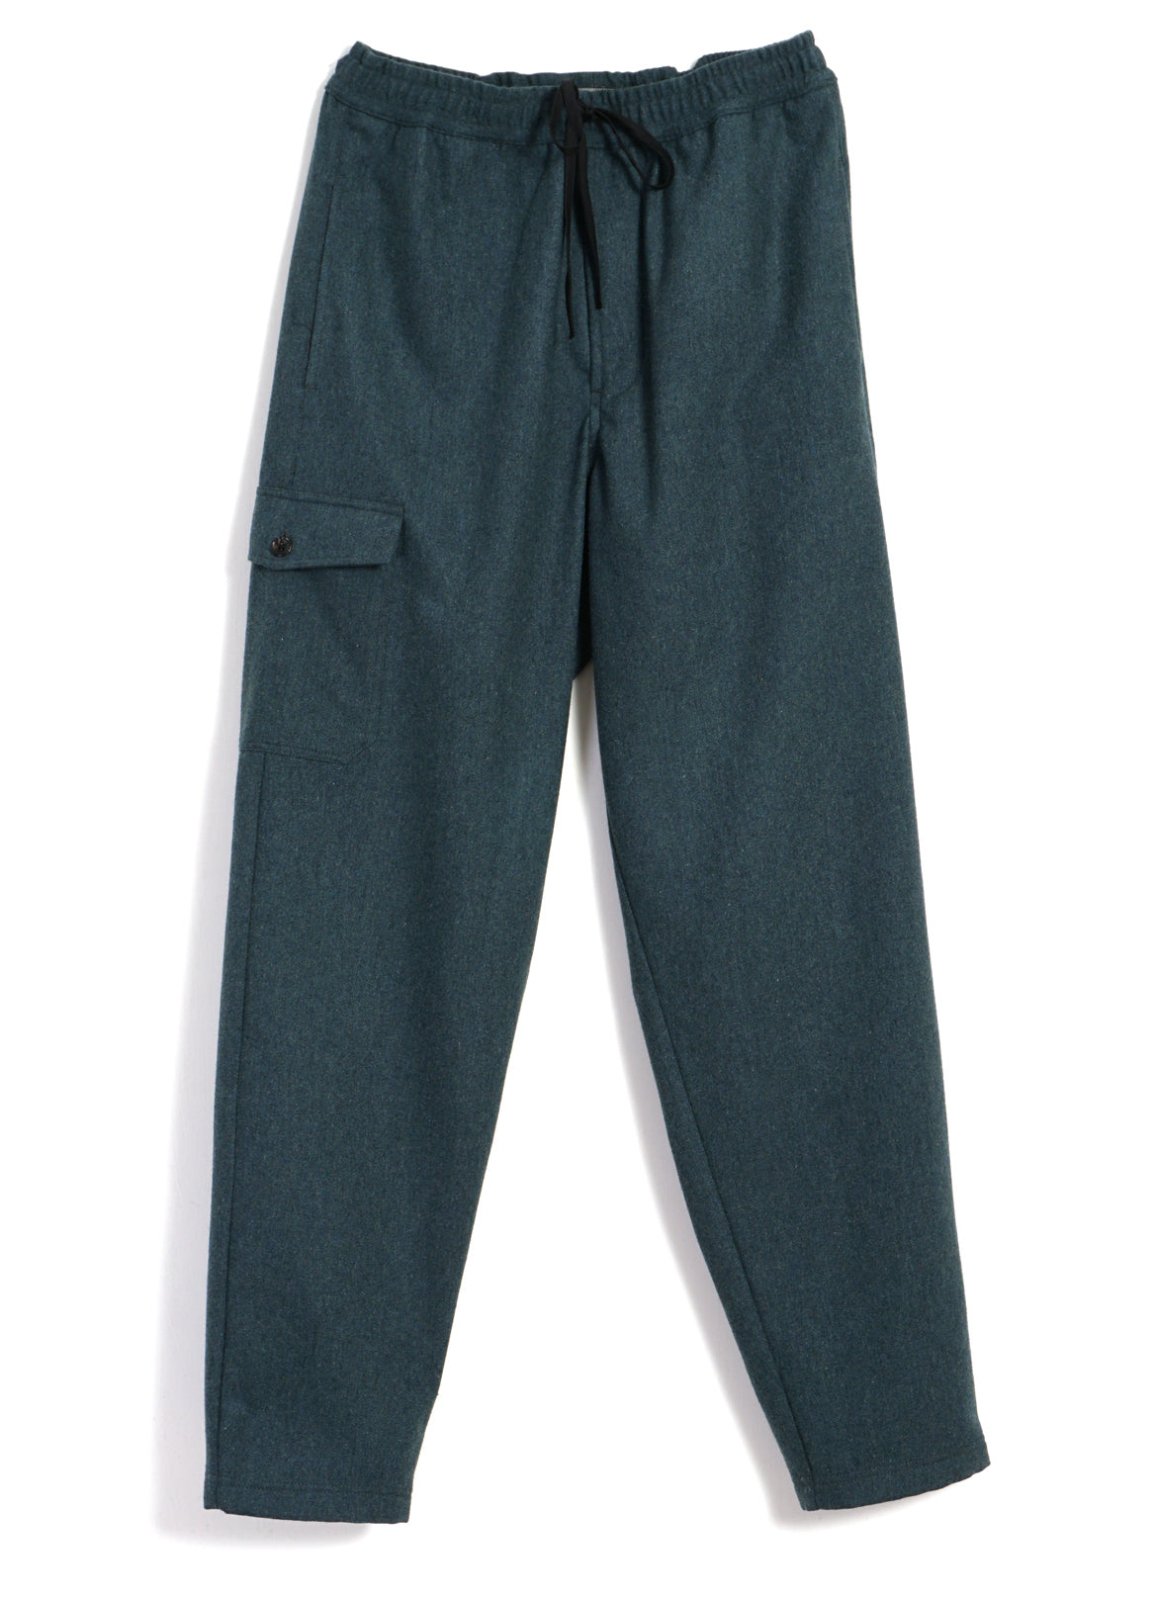 Track Pant - Grey - Scholar Shoppe for IIT Madras